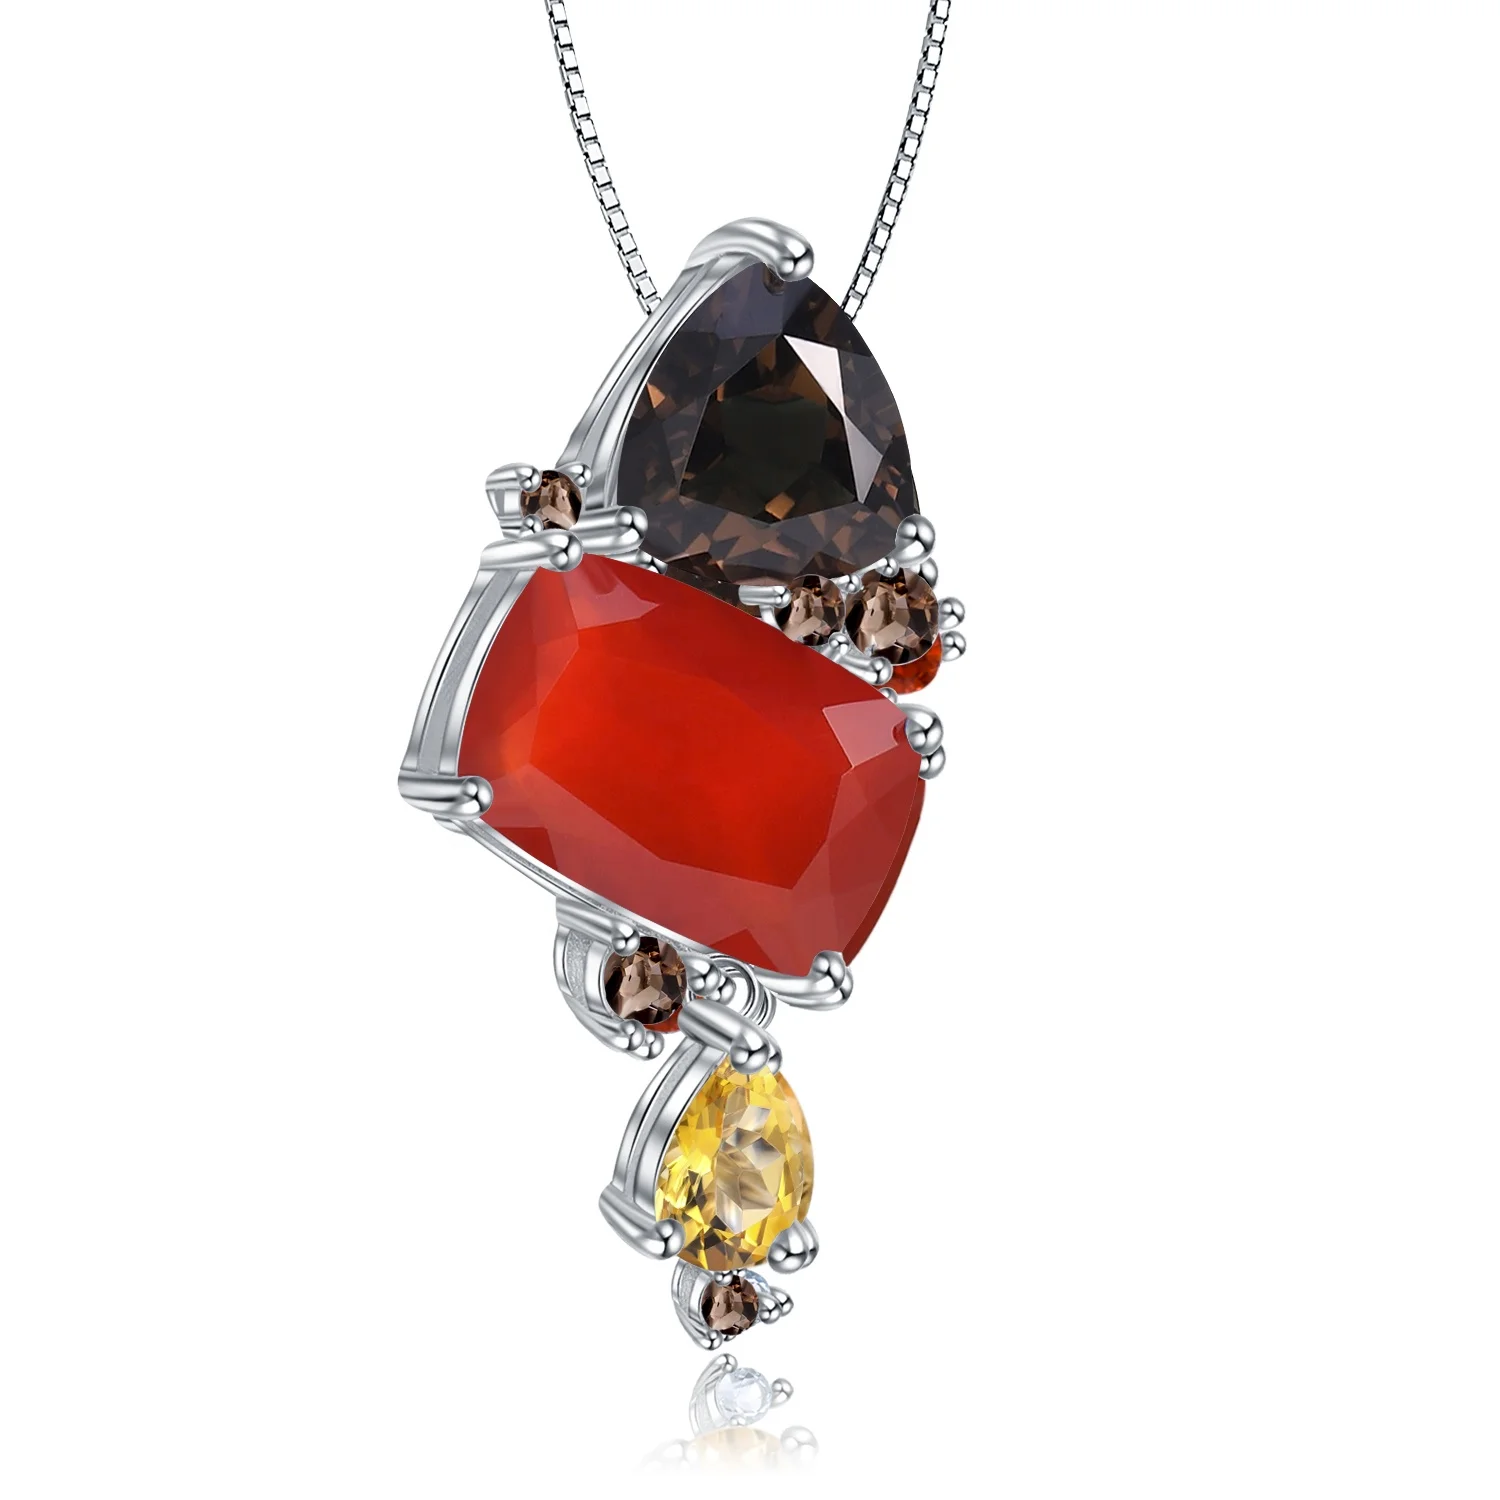 

Abiding Natural Red Agate Carnalian Gemstone Fashion Jewelry 925 Sterling Silver Pendant Necklace Women